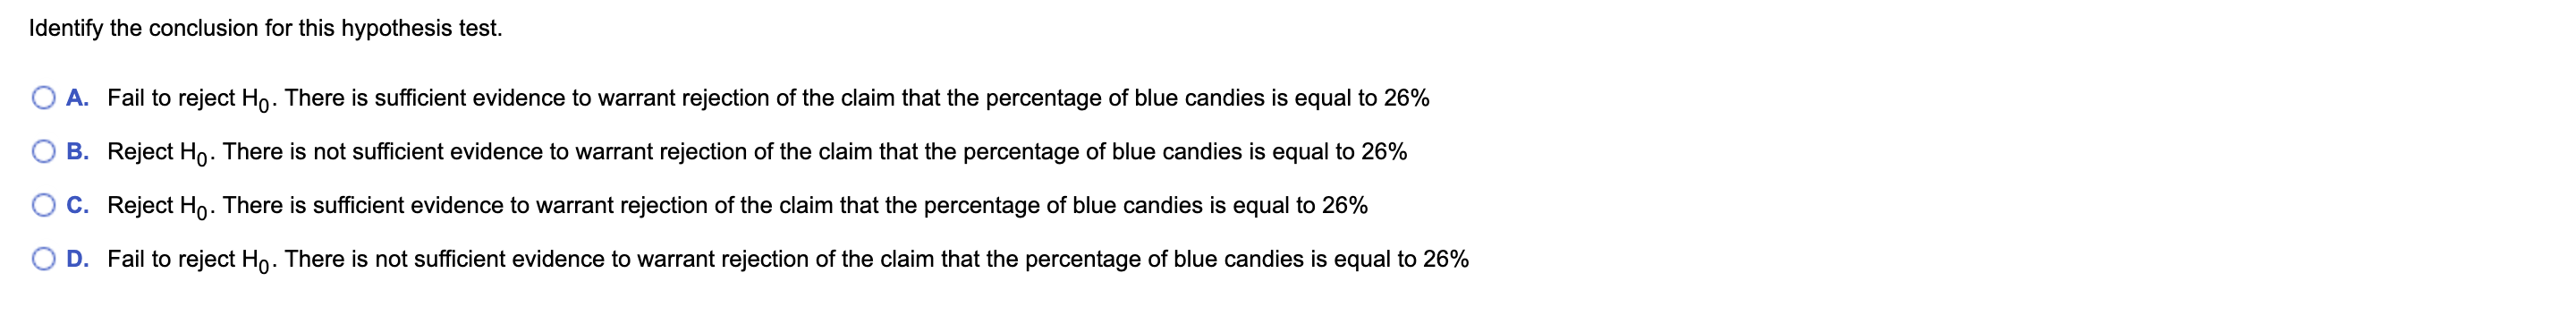 Identify the conclusion for this hypothesis test.
A. Fail to reject Ho. There is sufficient evidence to warrant rejection of the claim that the percentage of blue candies is equal to 26%
B. Reject Ho. There is not sufficient evidence to warrant rejection of the claim that the percentage of blue candies is equal to 26%
C. Reject Ho. There is sufficient evidence to warrant rejection of the claim that the percentage of blue candies is equal to 26%
Fail to reject Ho. There is not sufficient evidence to warrant rejection of the claim that the percentage of blue candies is equal to 26%
D.
